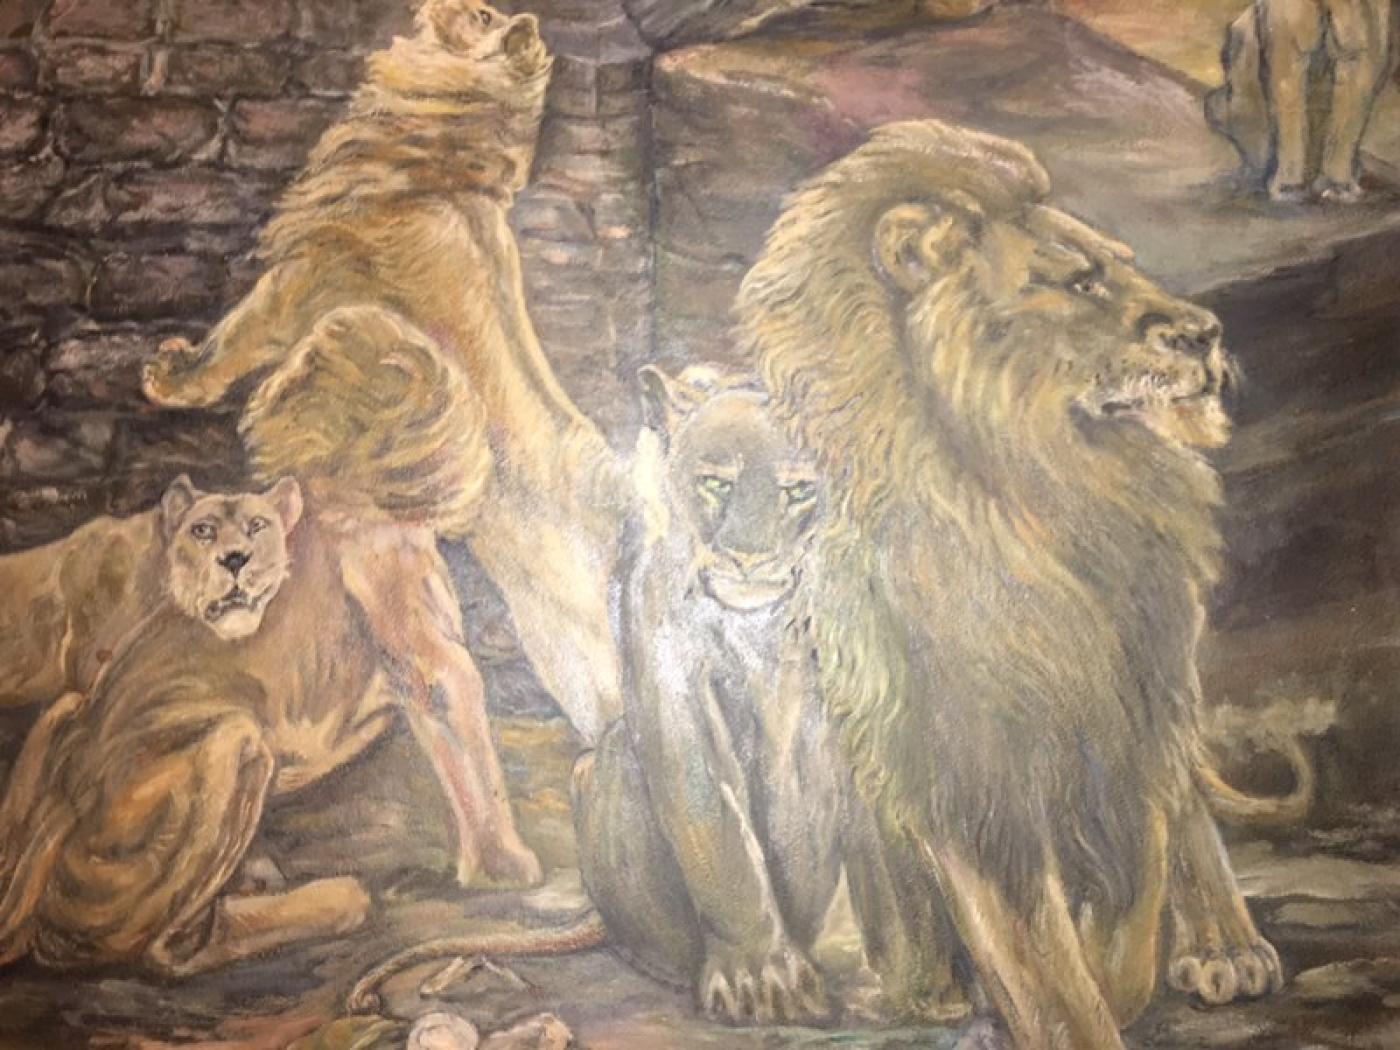 Peter Maier - MID CENTURY MEDIEVAL SACRIFICE TO LION DEN PAINTING